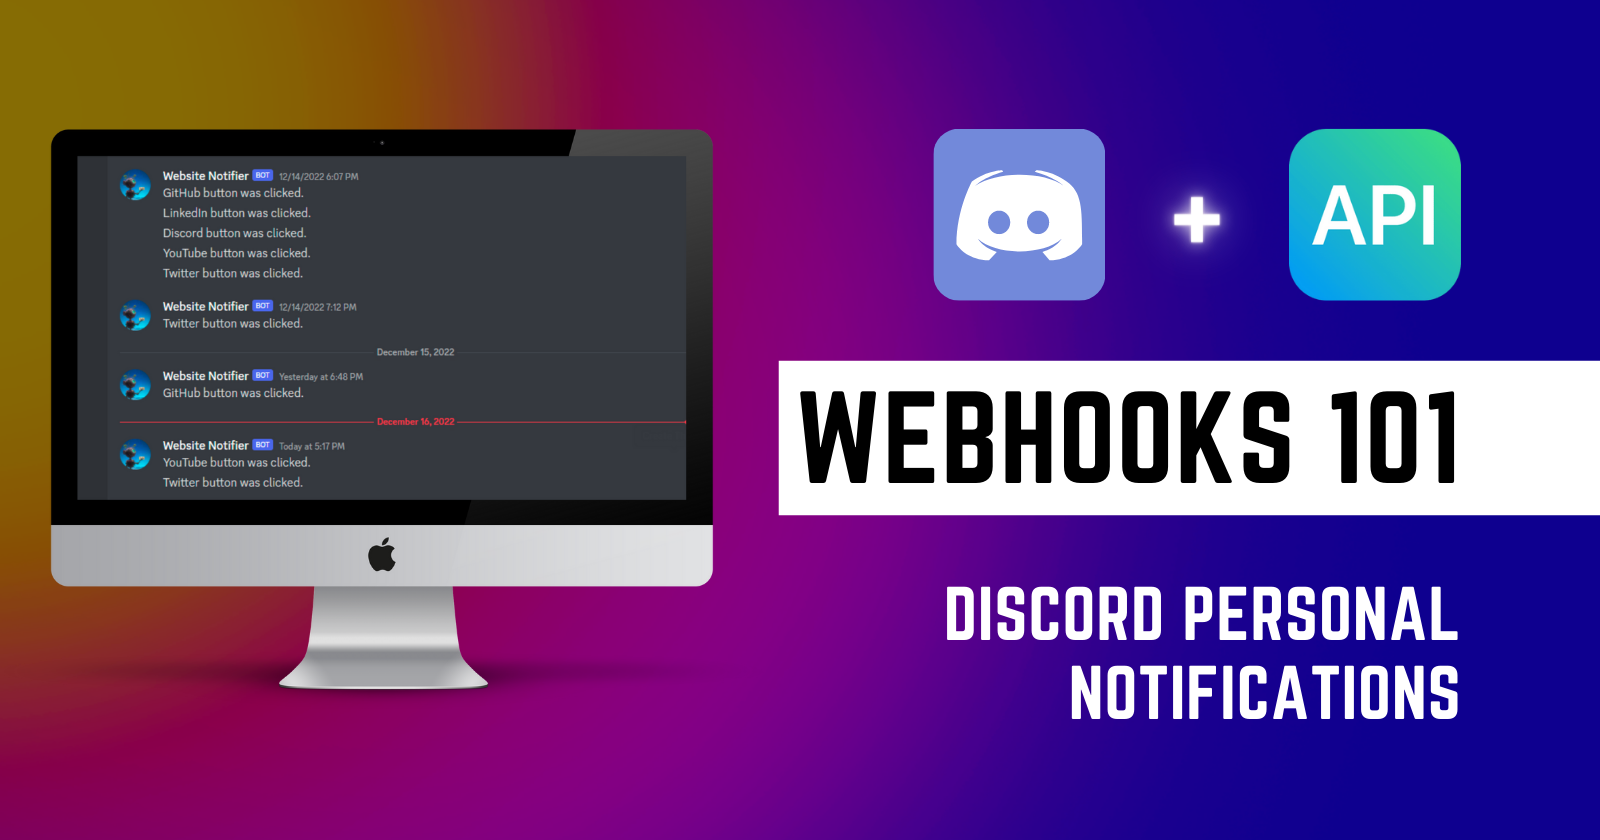 🎣 Webhooks Demystified - Get Real-Time Personal Notifications with Discord Webhooks